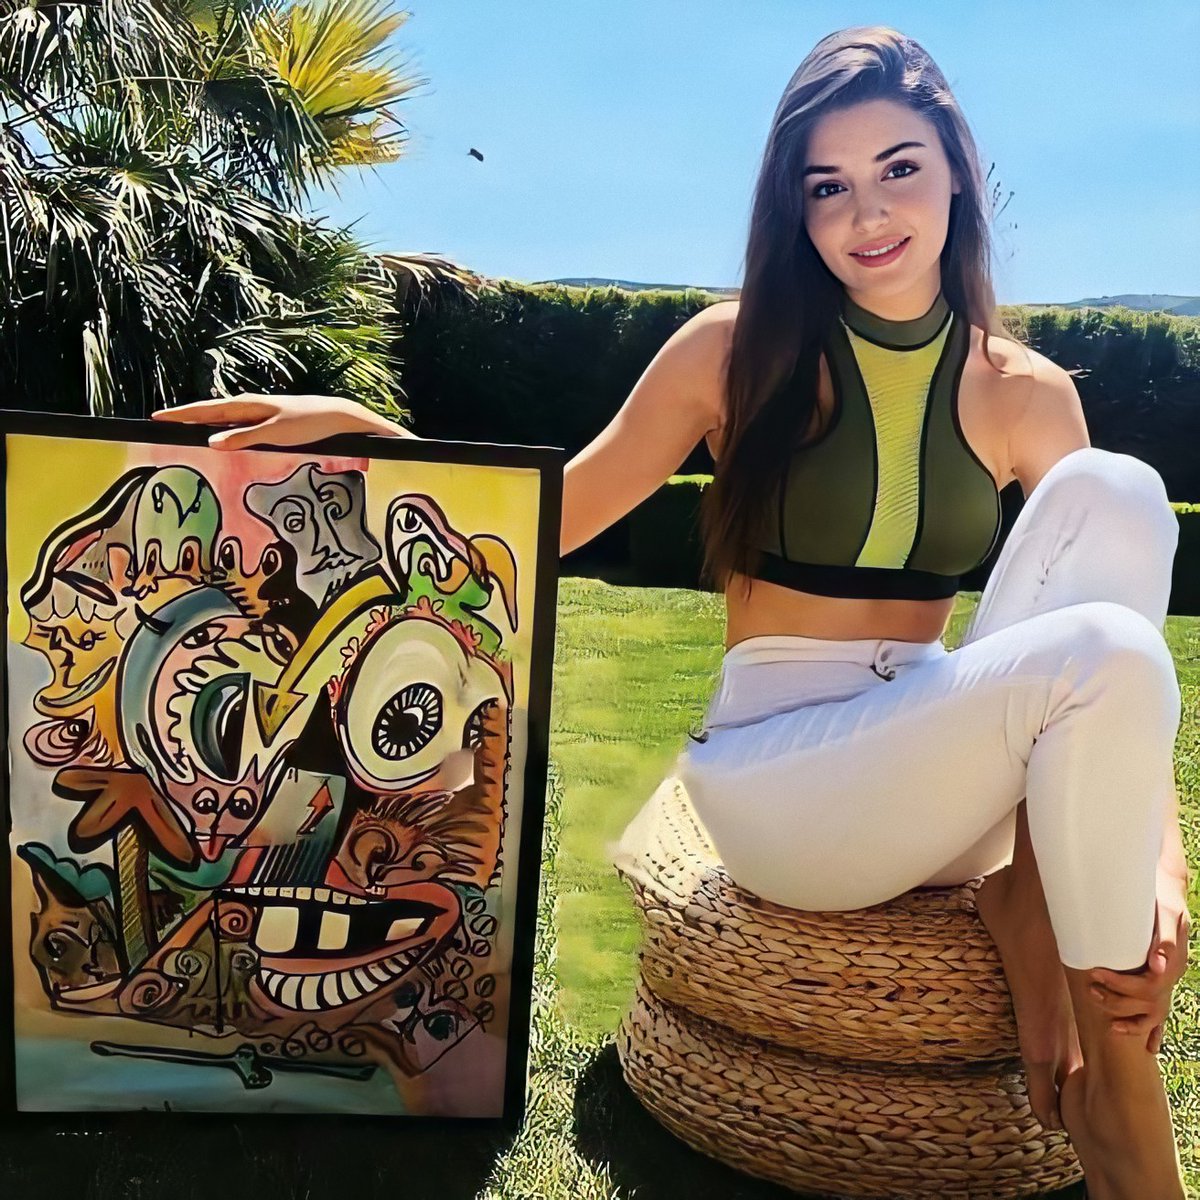 She painted for a charity event this year, for "Kansersiz Yaşam Derneği" which she has been supporting for a long time. She also says she wants to open an exhibition of her own some day. #HandeErçel